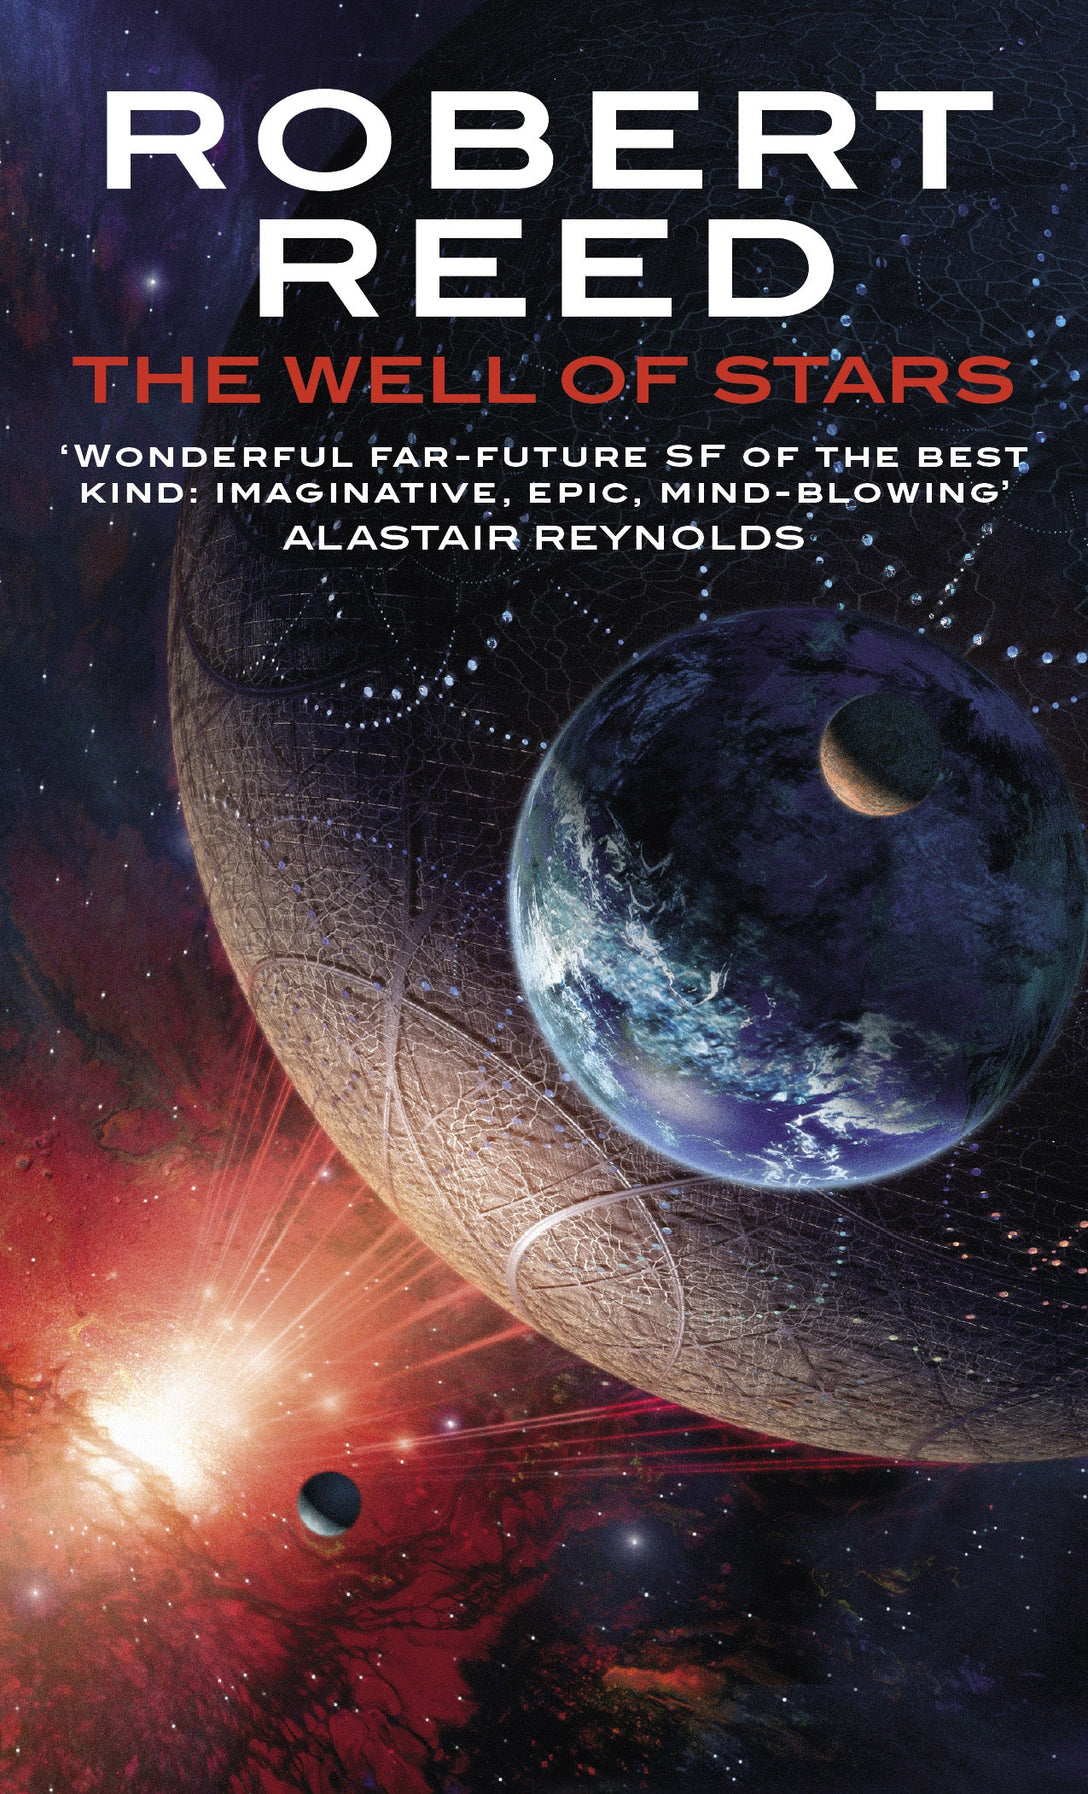 The Well Of Stars by Robert Reed